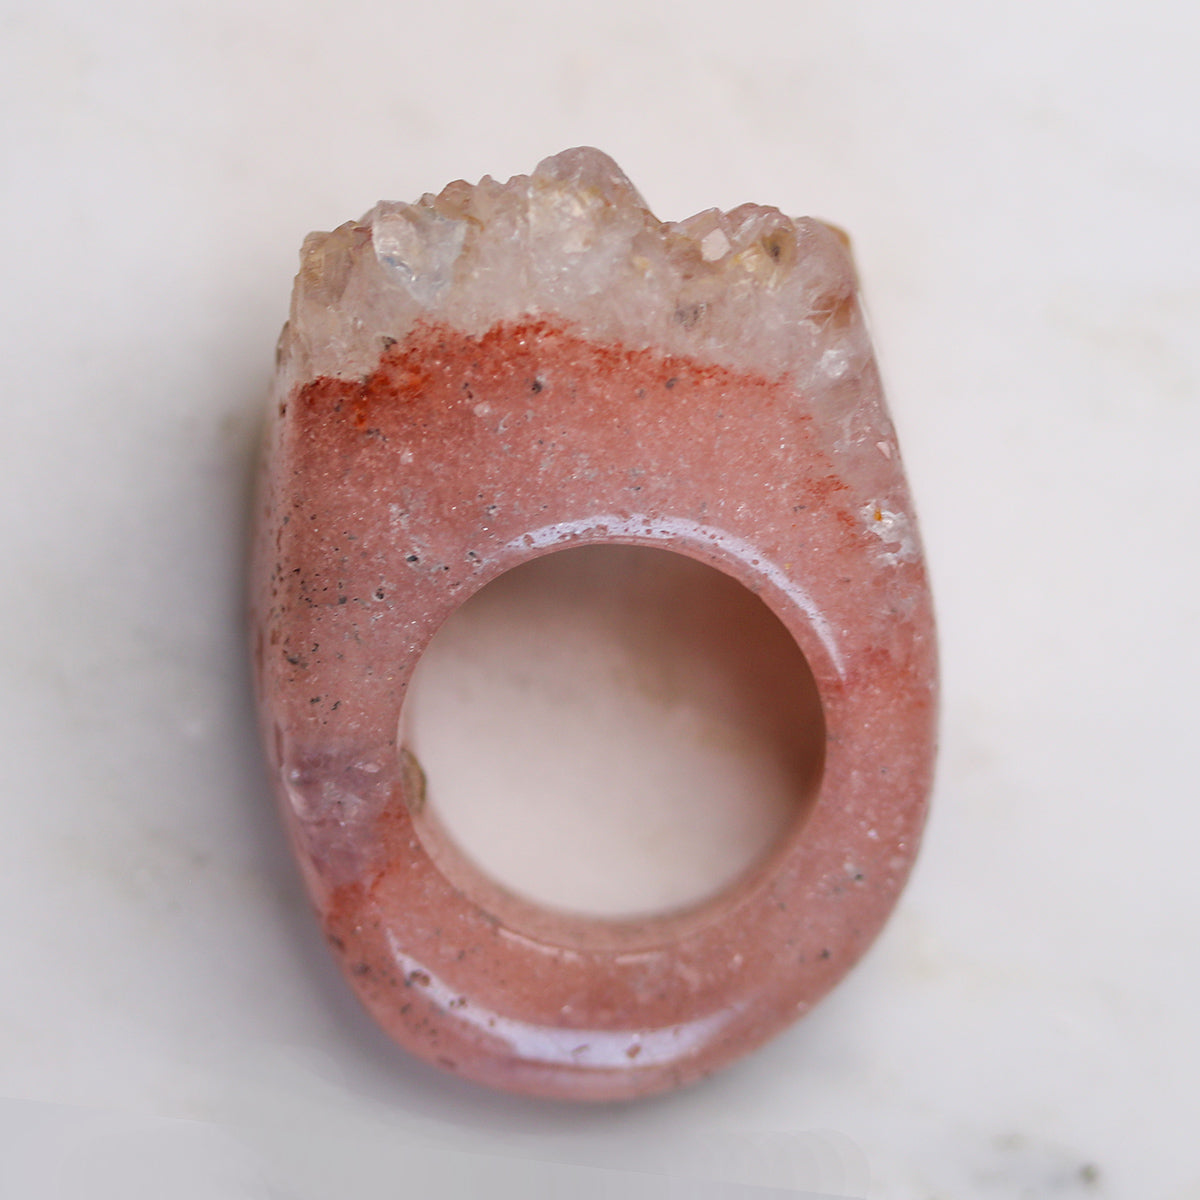 Carved Rock Ring - Pink Amethyst